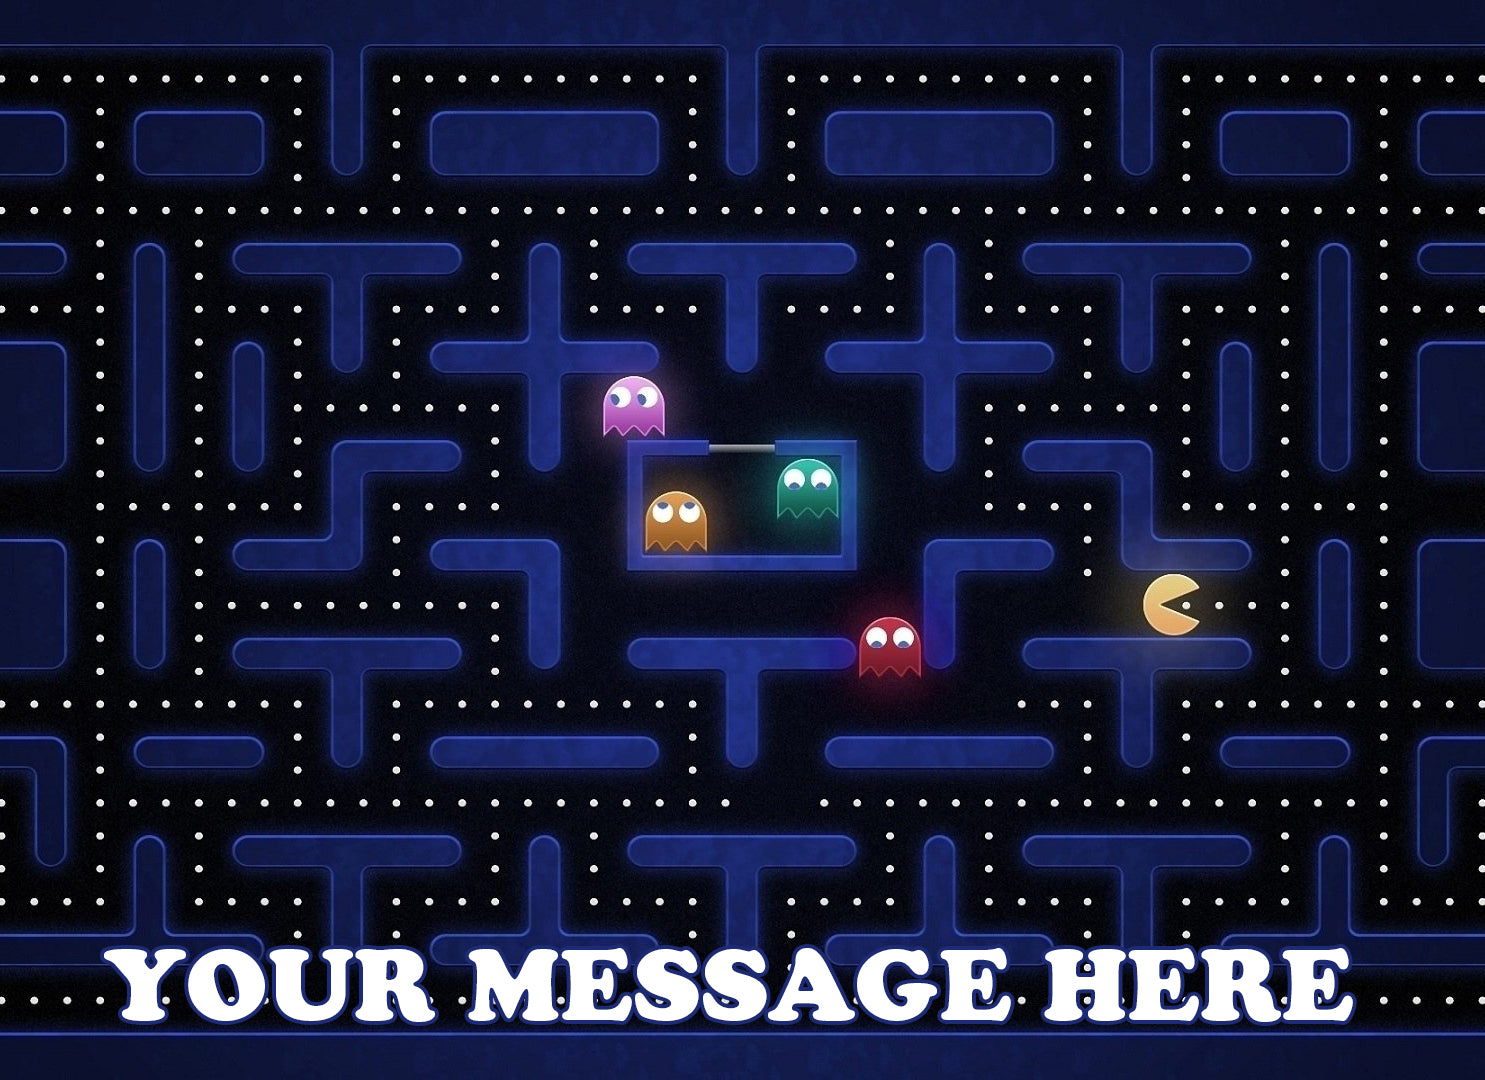 PAC-MAN - Get ready to roll with this month's custom theme